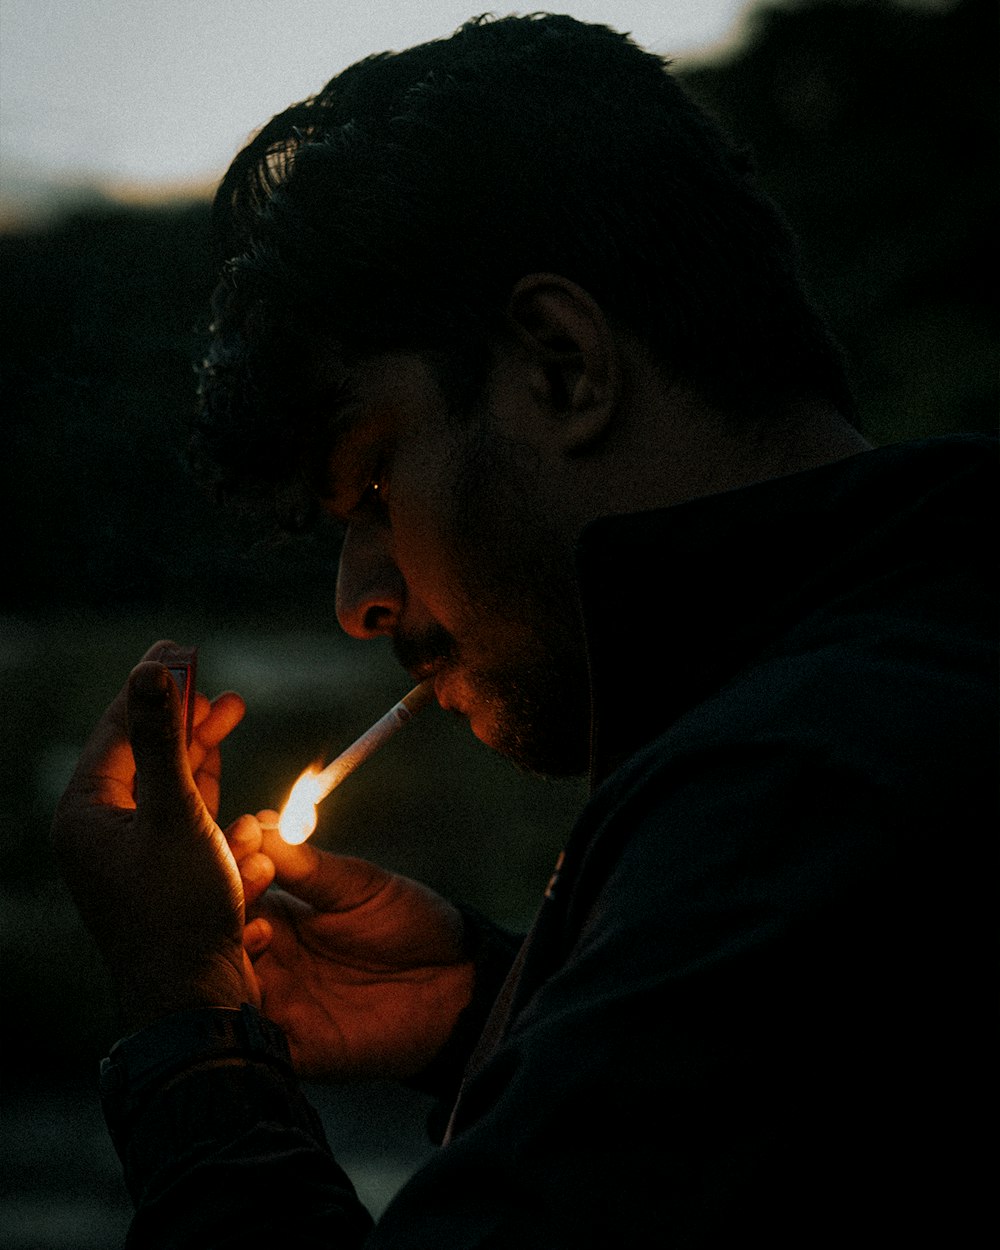 a man holding a lit cigarette in his hand